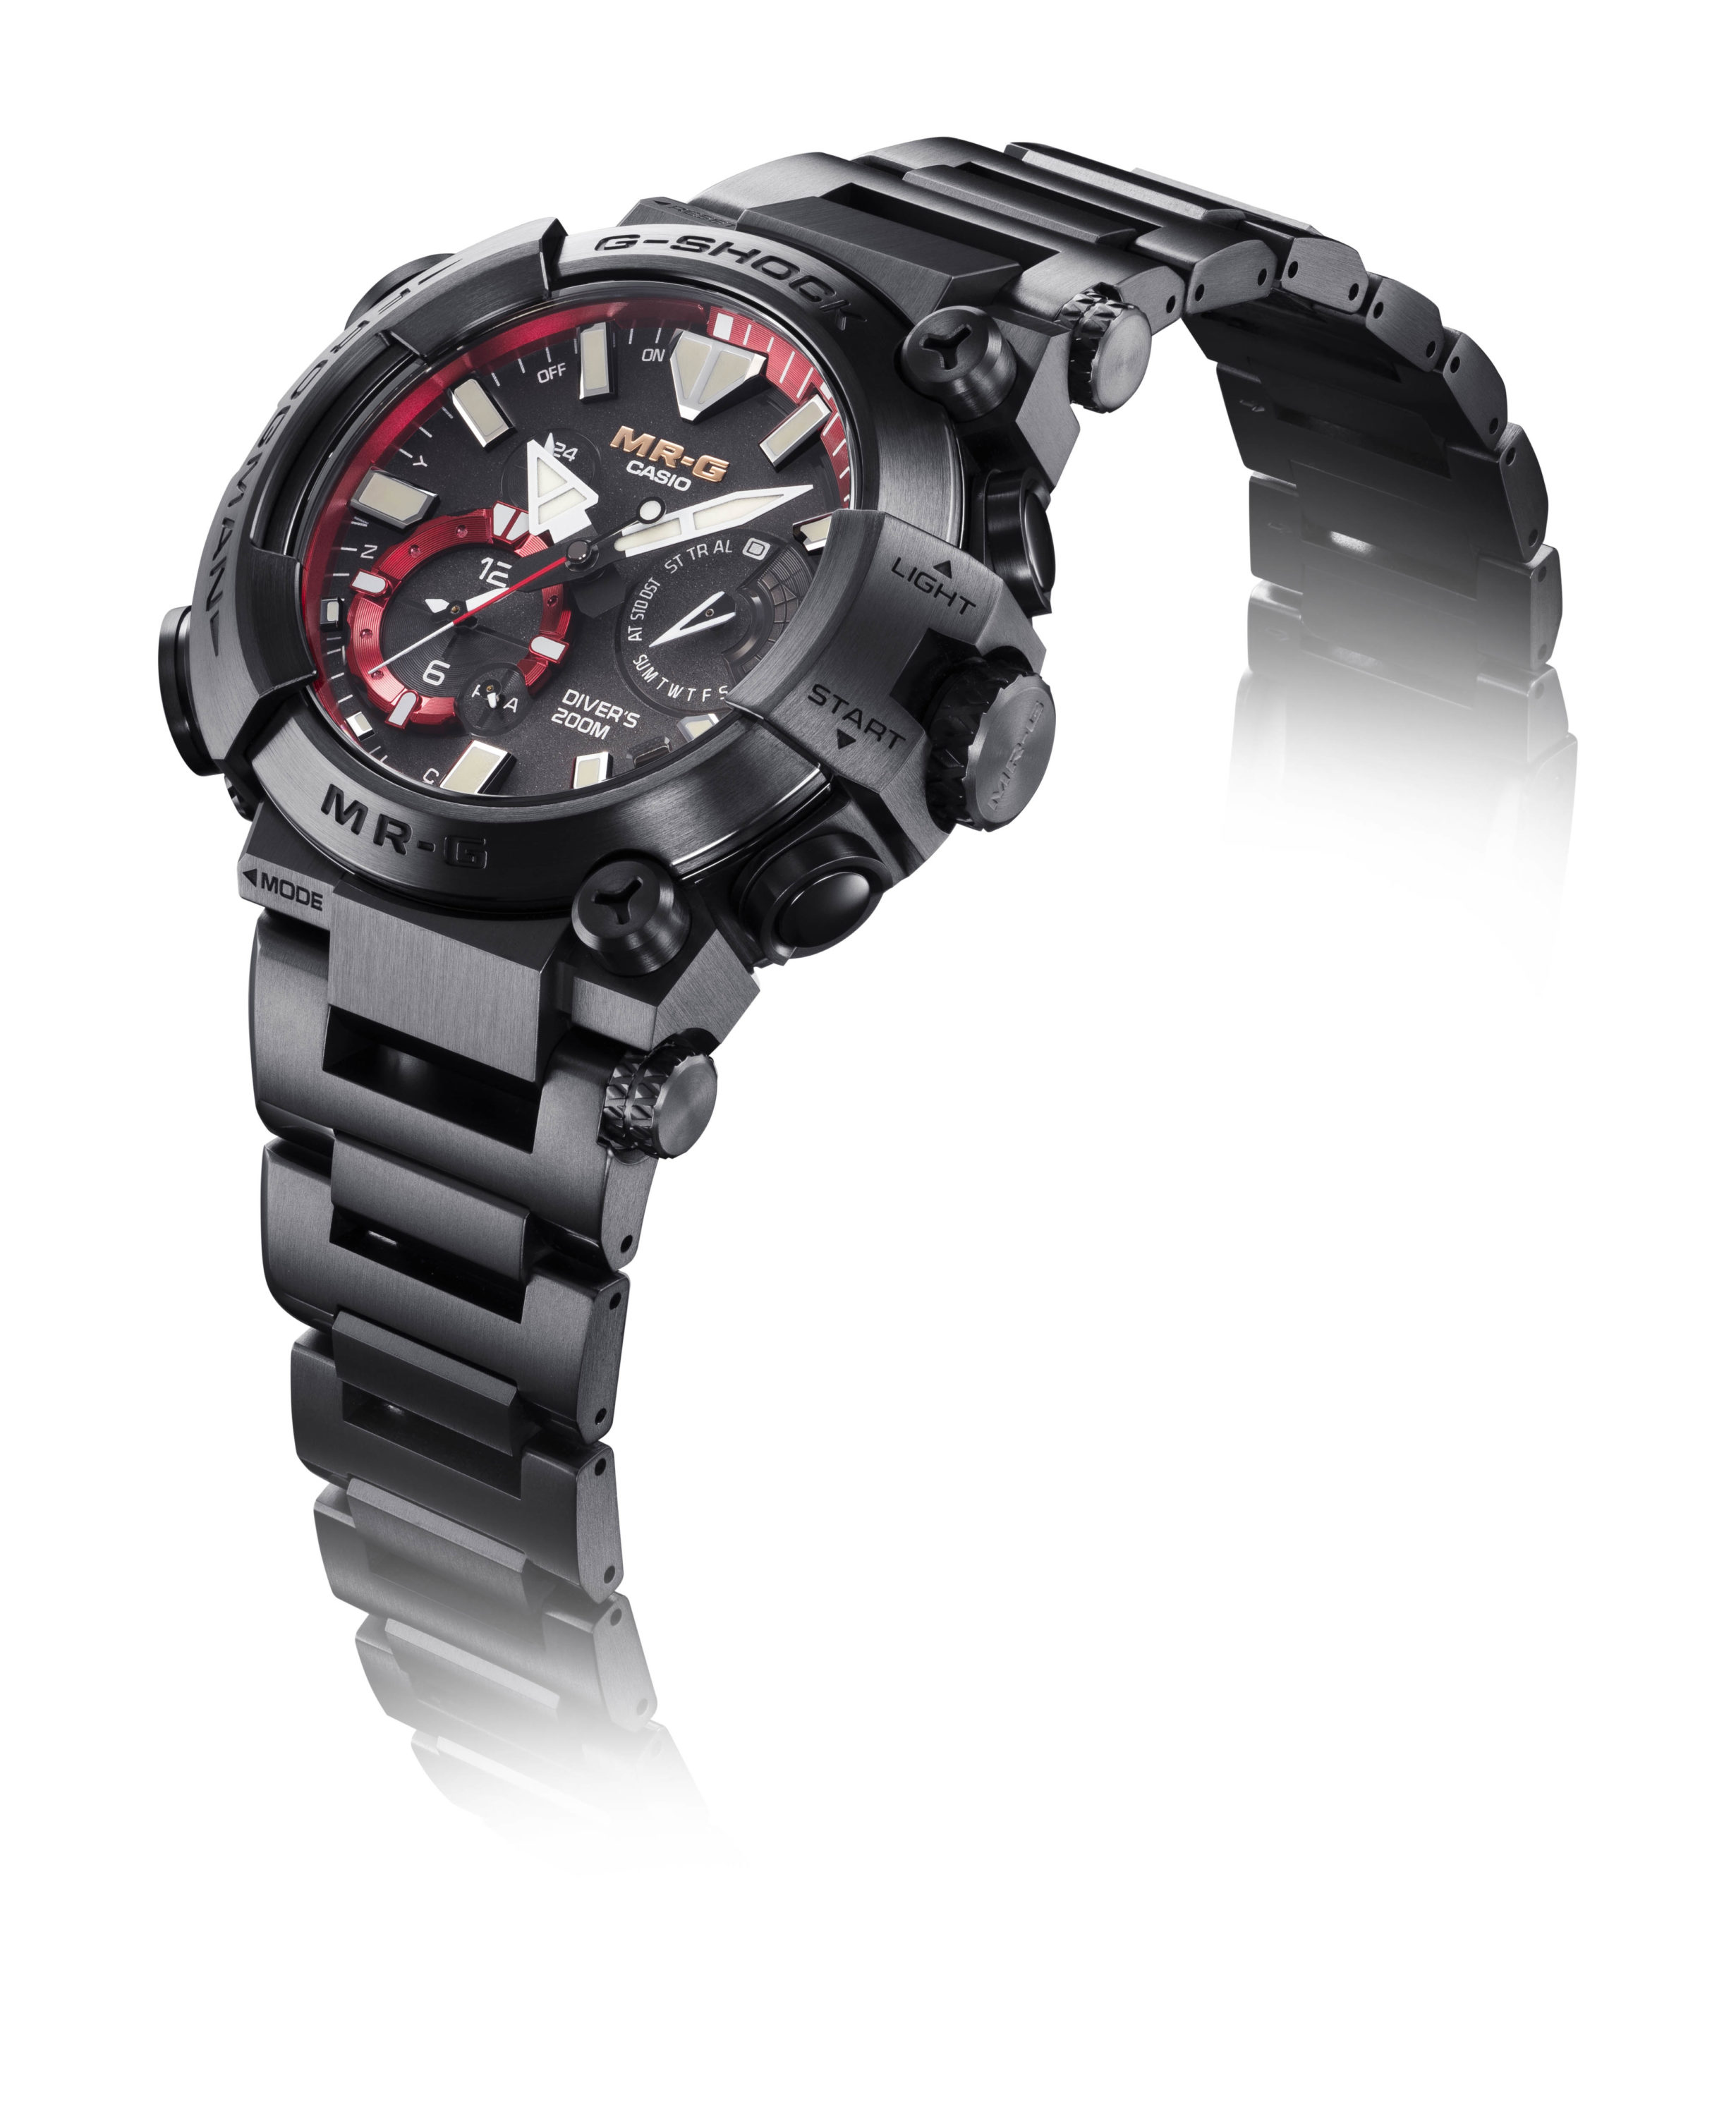 Elevating the MR-G Frogman, G-Shock Introduces the MRG-BF1000B1A in a Luxury Titanium Iteration